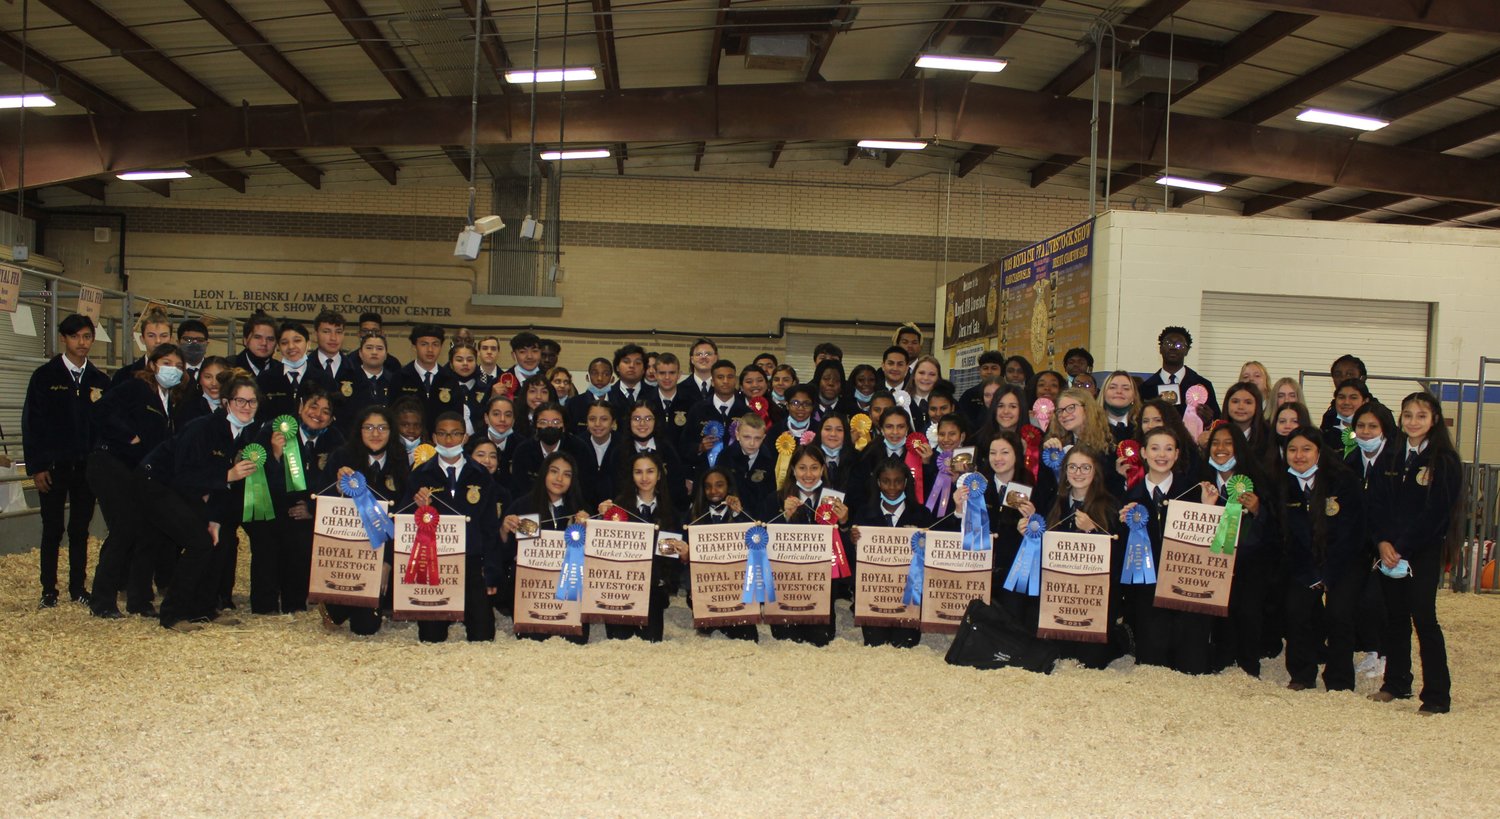 More than 70 Royal ISD students participated in this year’s RISD FFA Livestock Show. The event broke multiple records in fundraising and totaled out at more than $270,000 raised for FFA students.